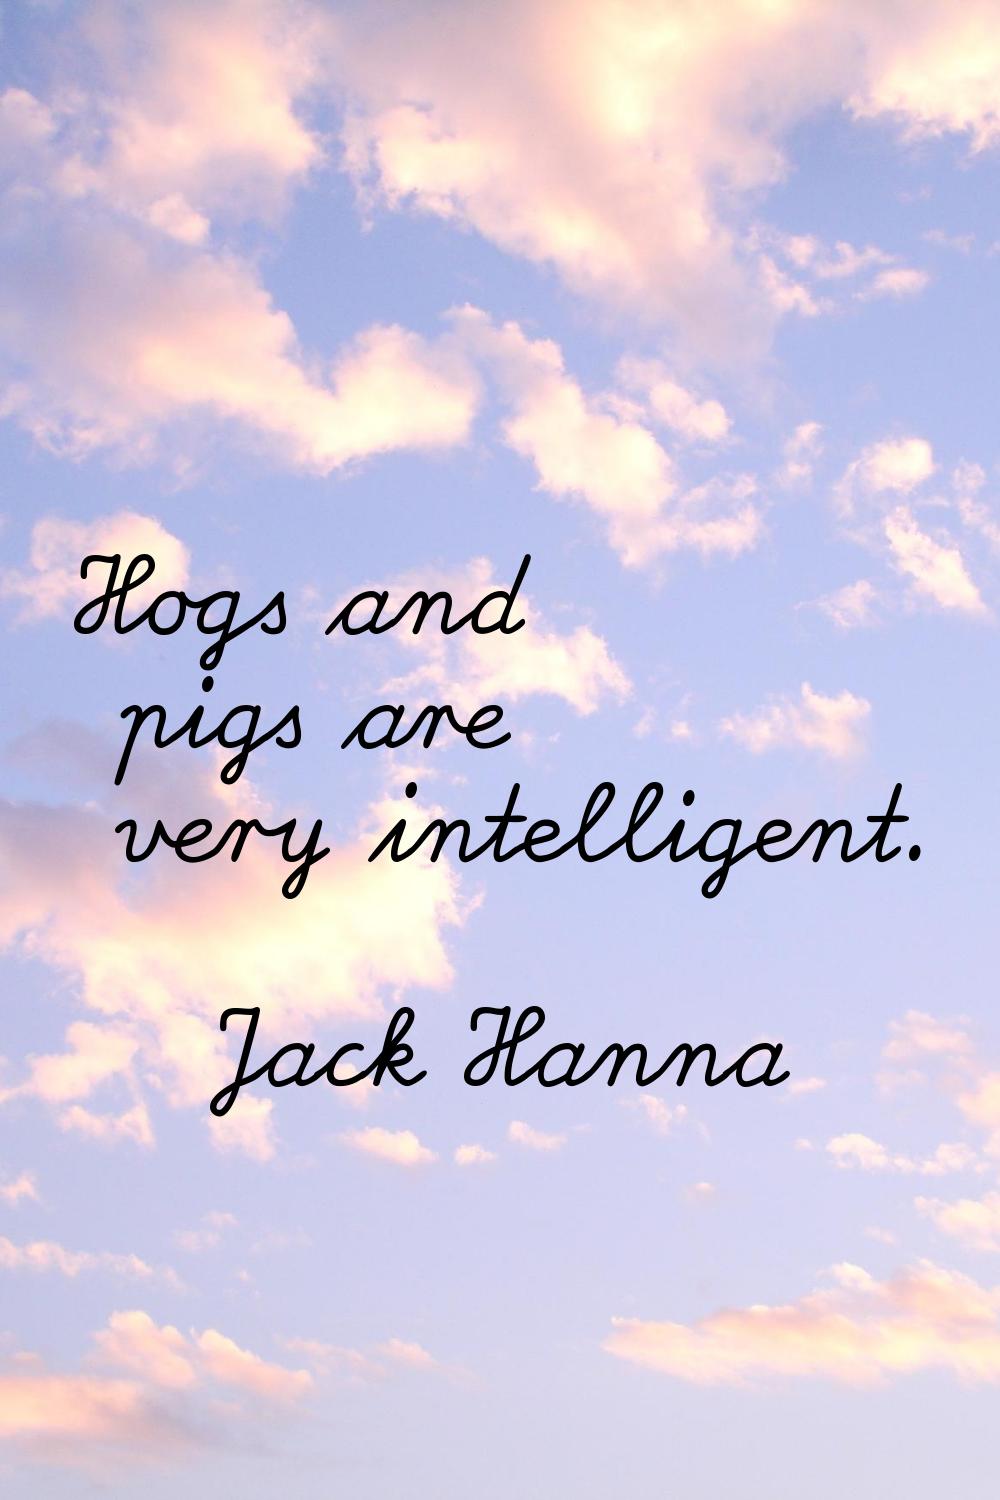 Hogs and pigs are very intelligent.